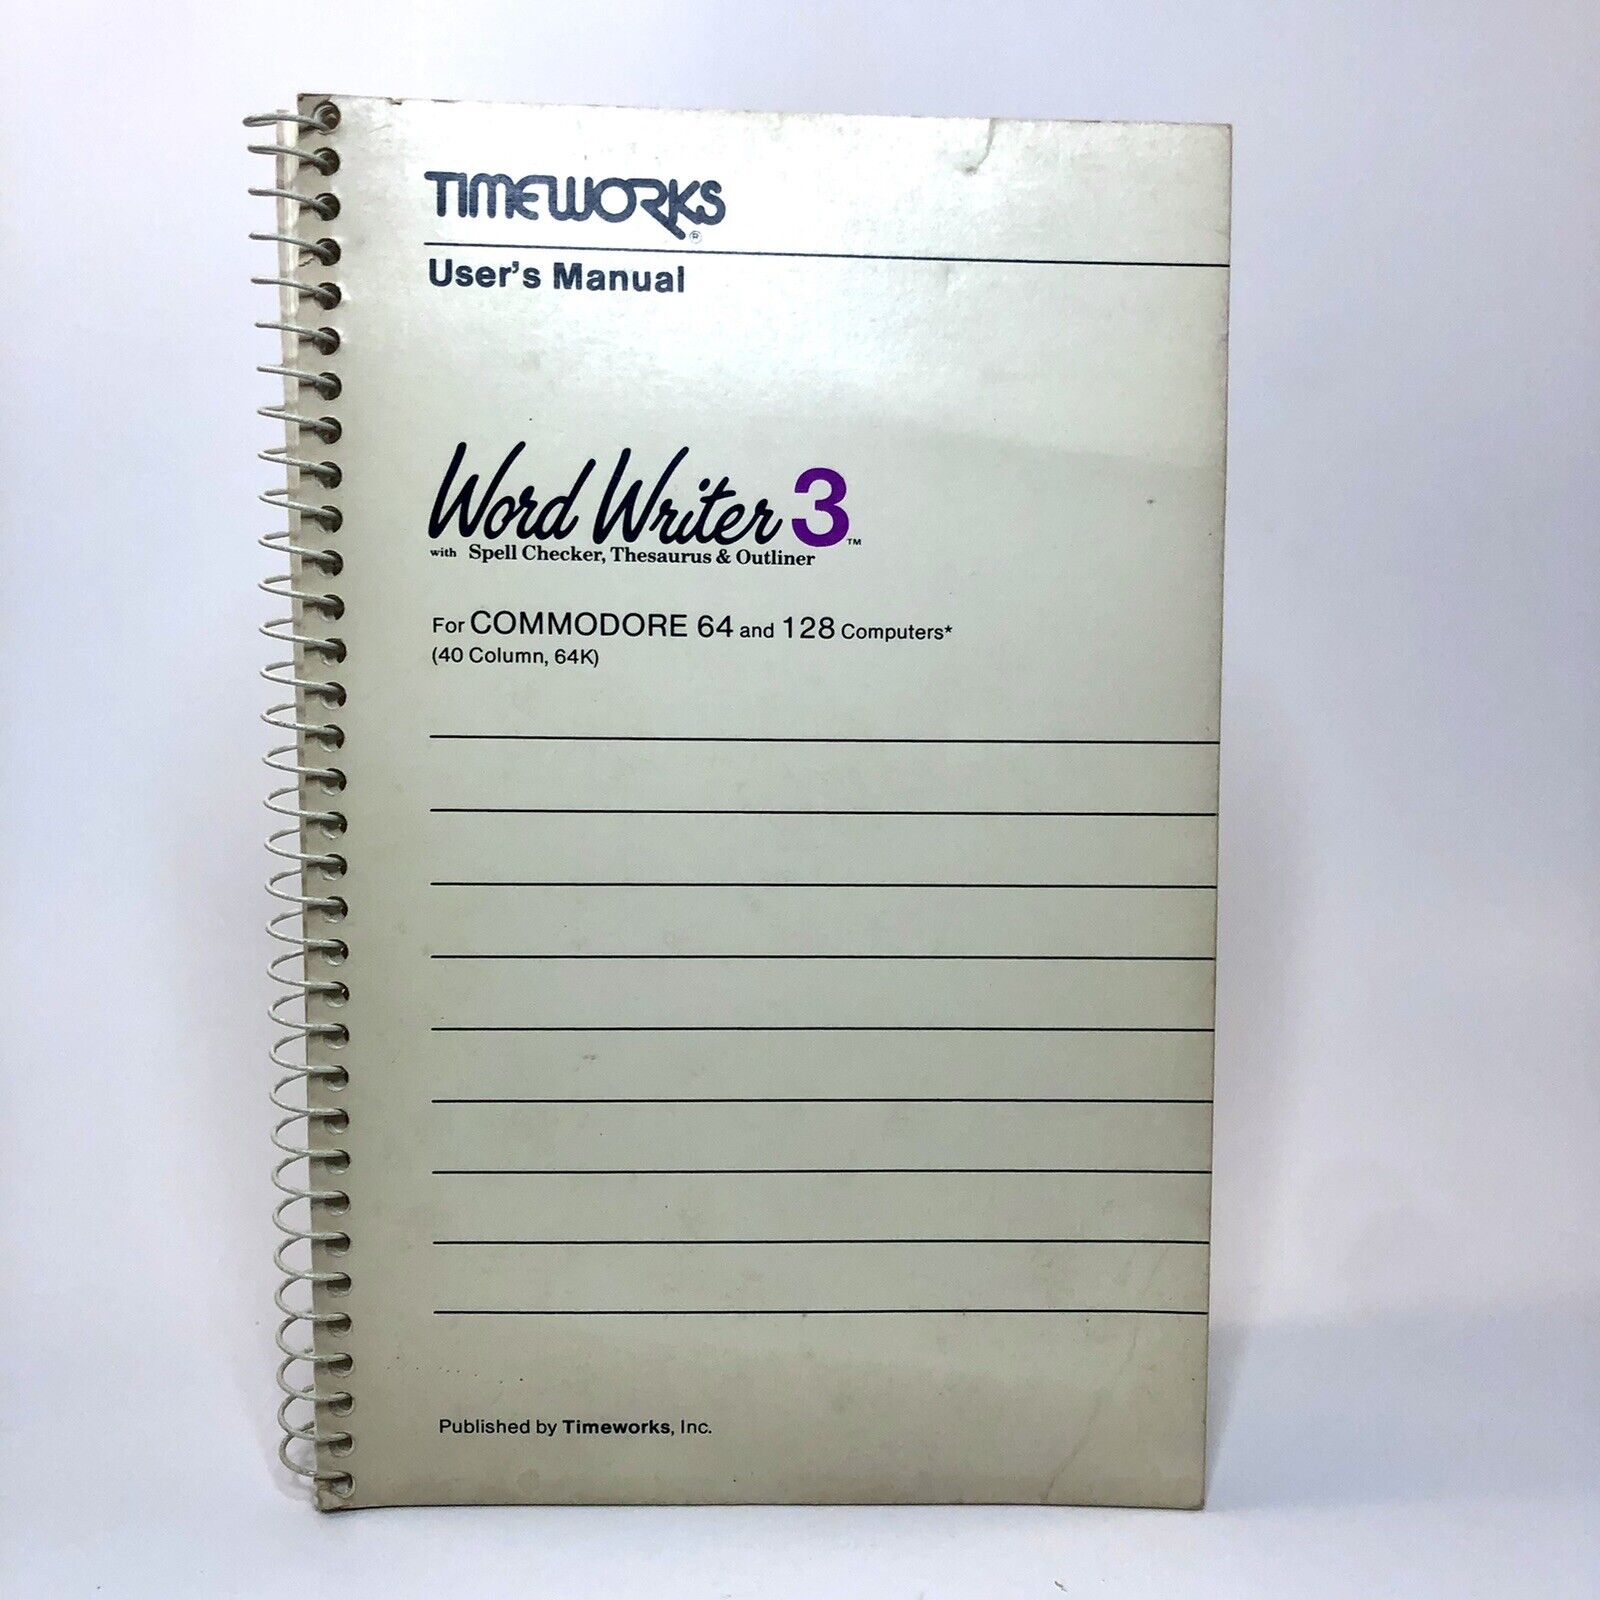 Vintage 1982 Timeworks User\'s Manual Word Writer 3 for Commodore 64 & 128